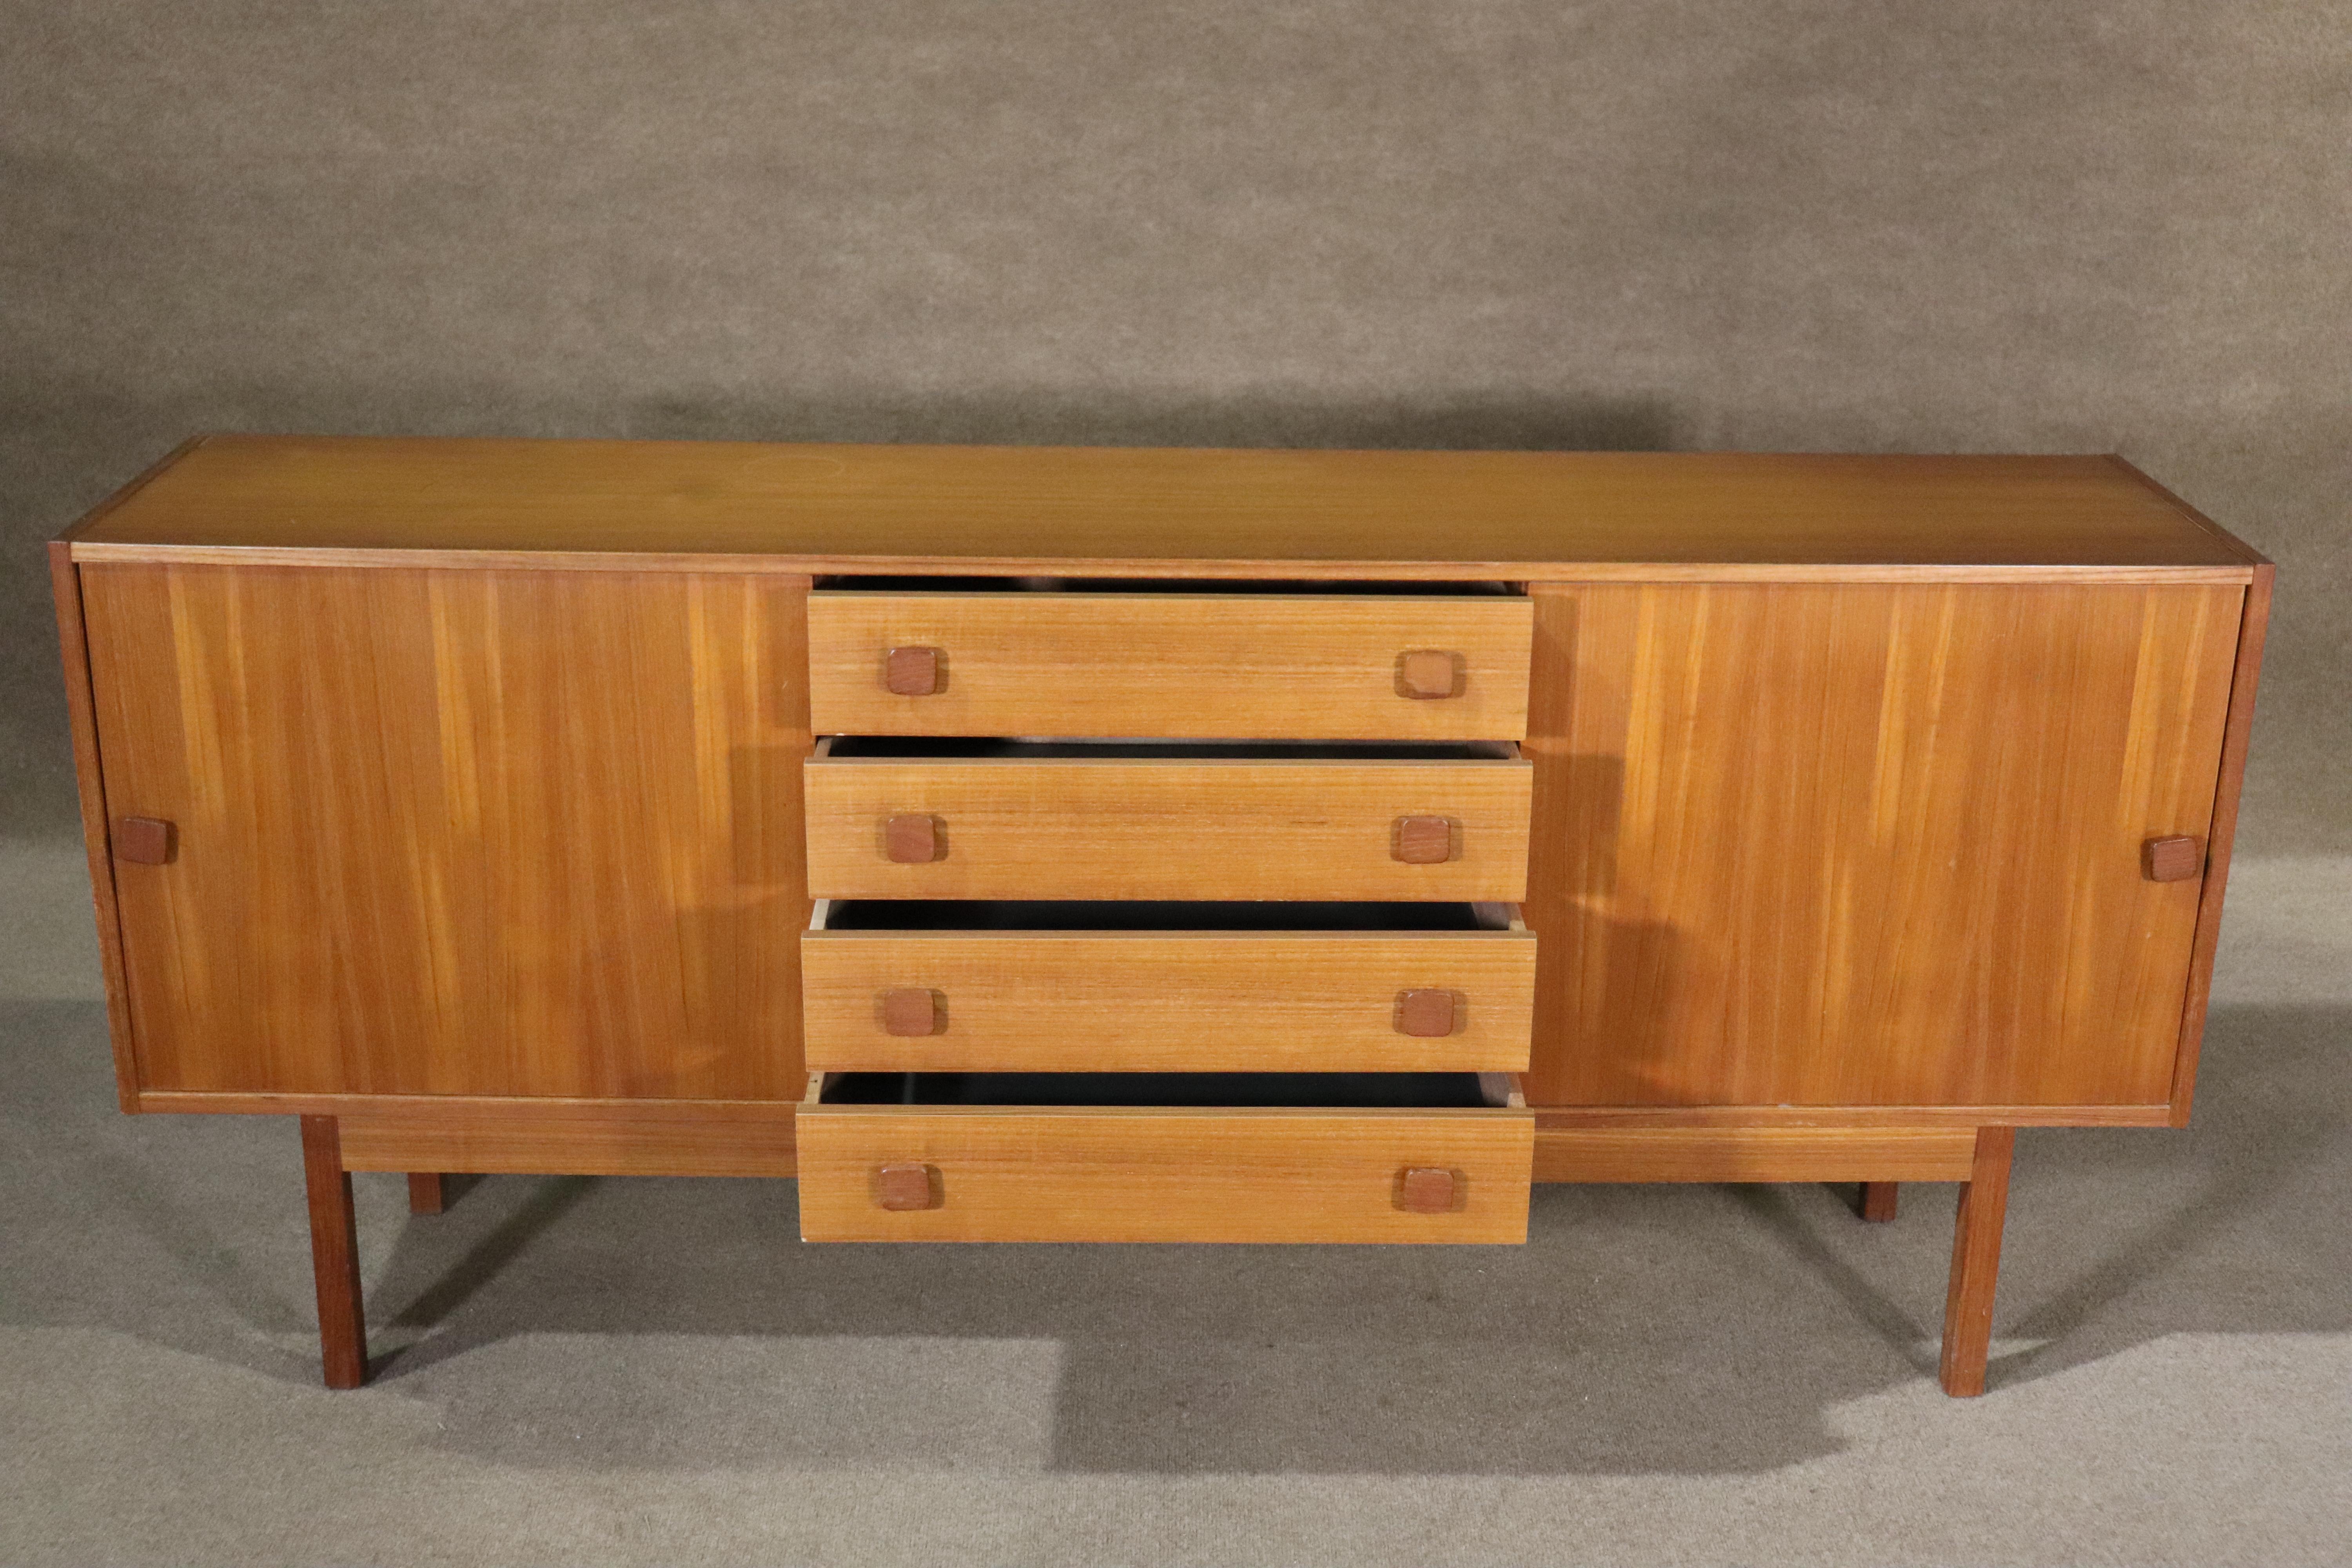 Danish made credenza in teak wood with sliding doors and center drawer storage.
Please confirm location NY or NJ